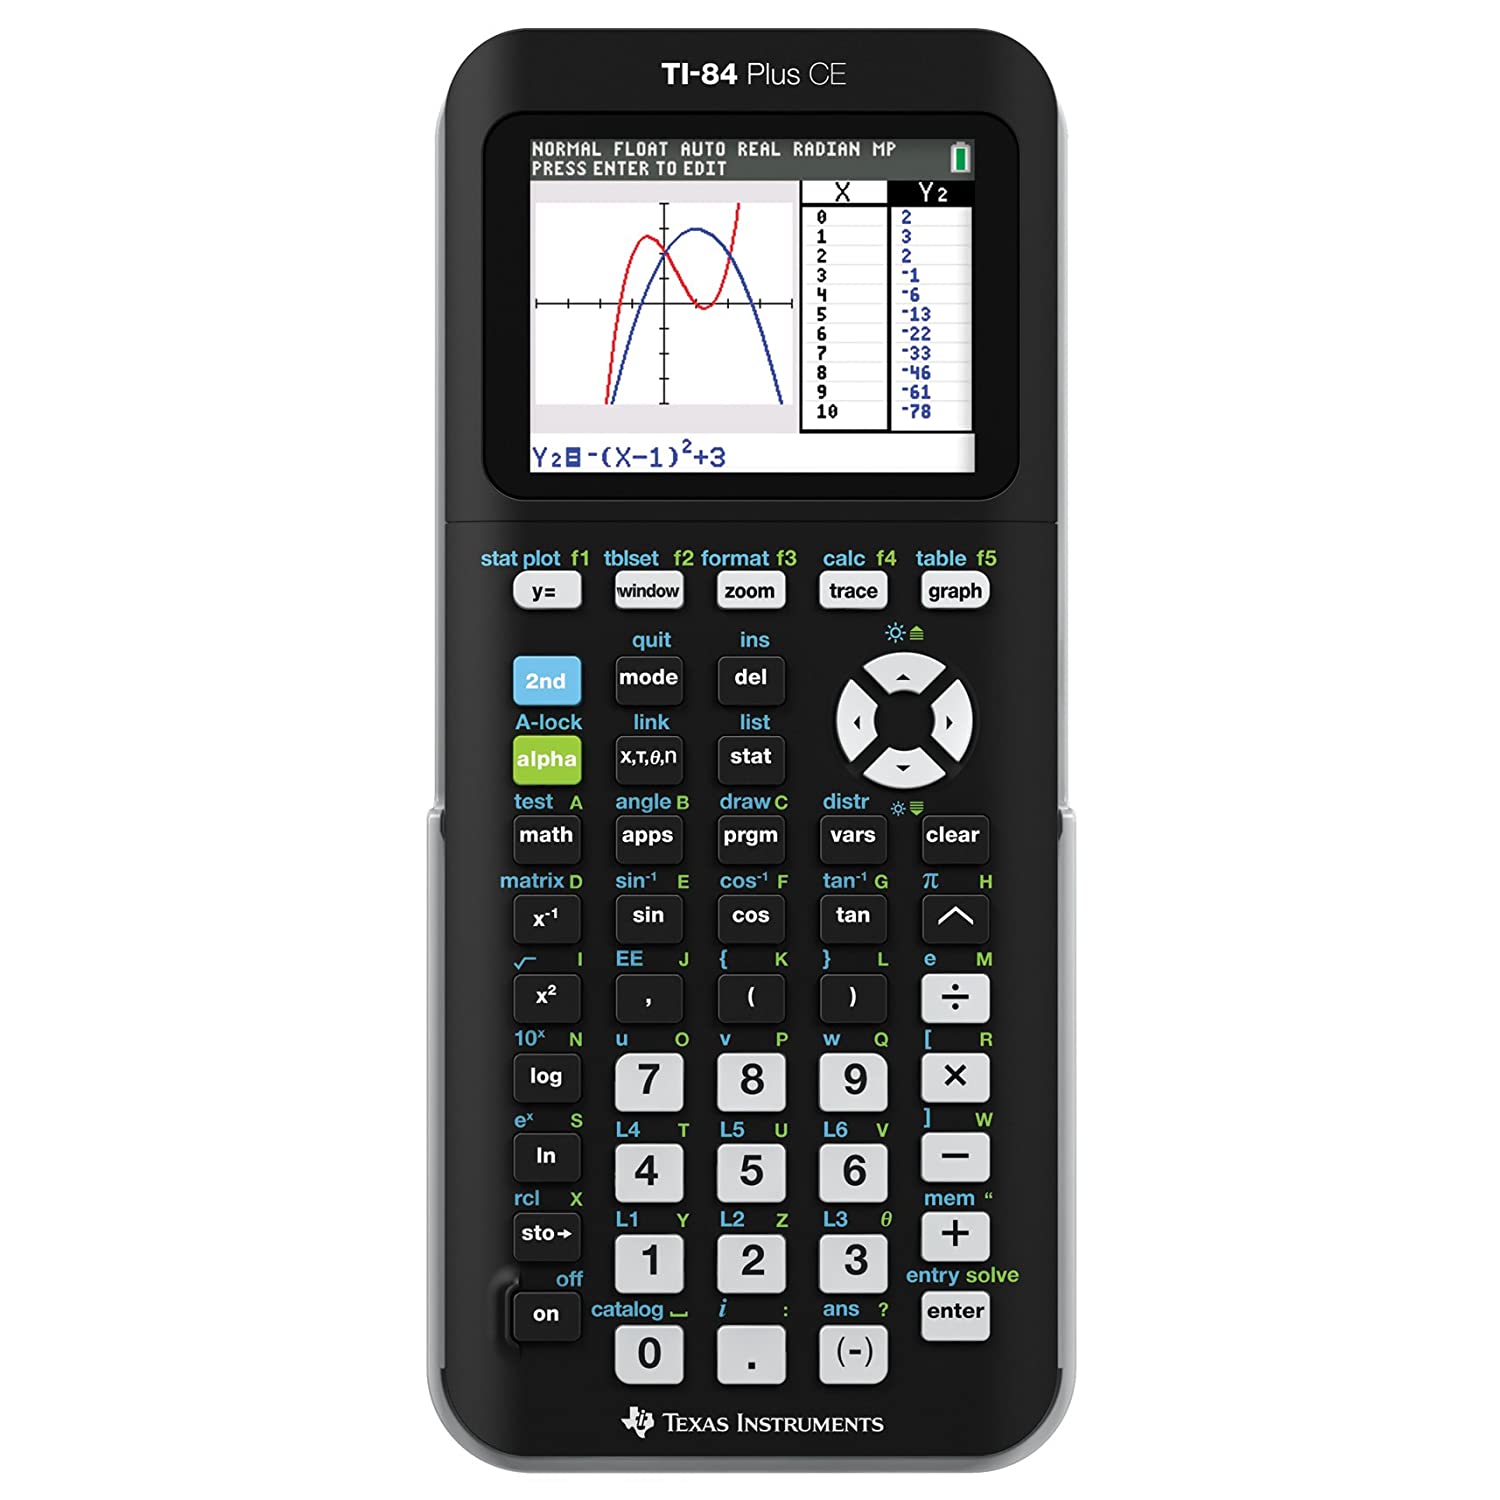 Texas Instruments TI-84 Plus CE Graphing Calculator, Black - image 4 of 5